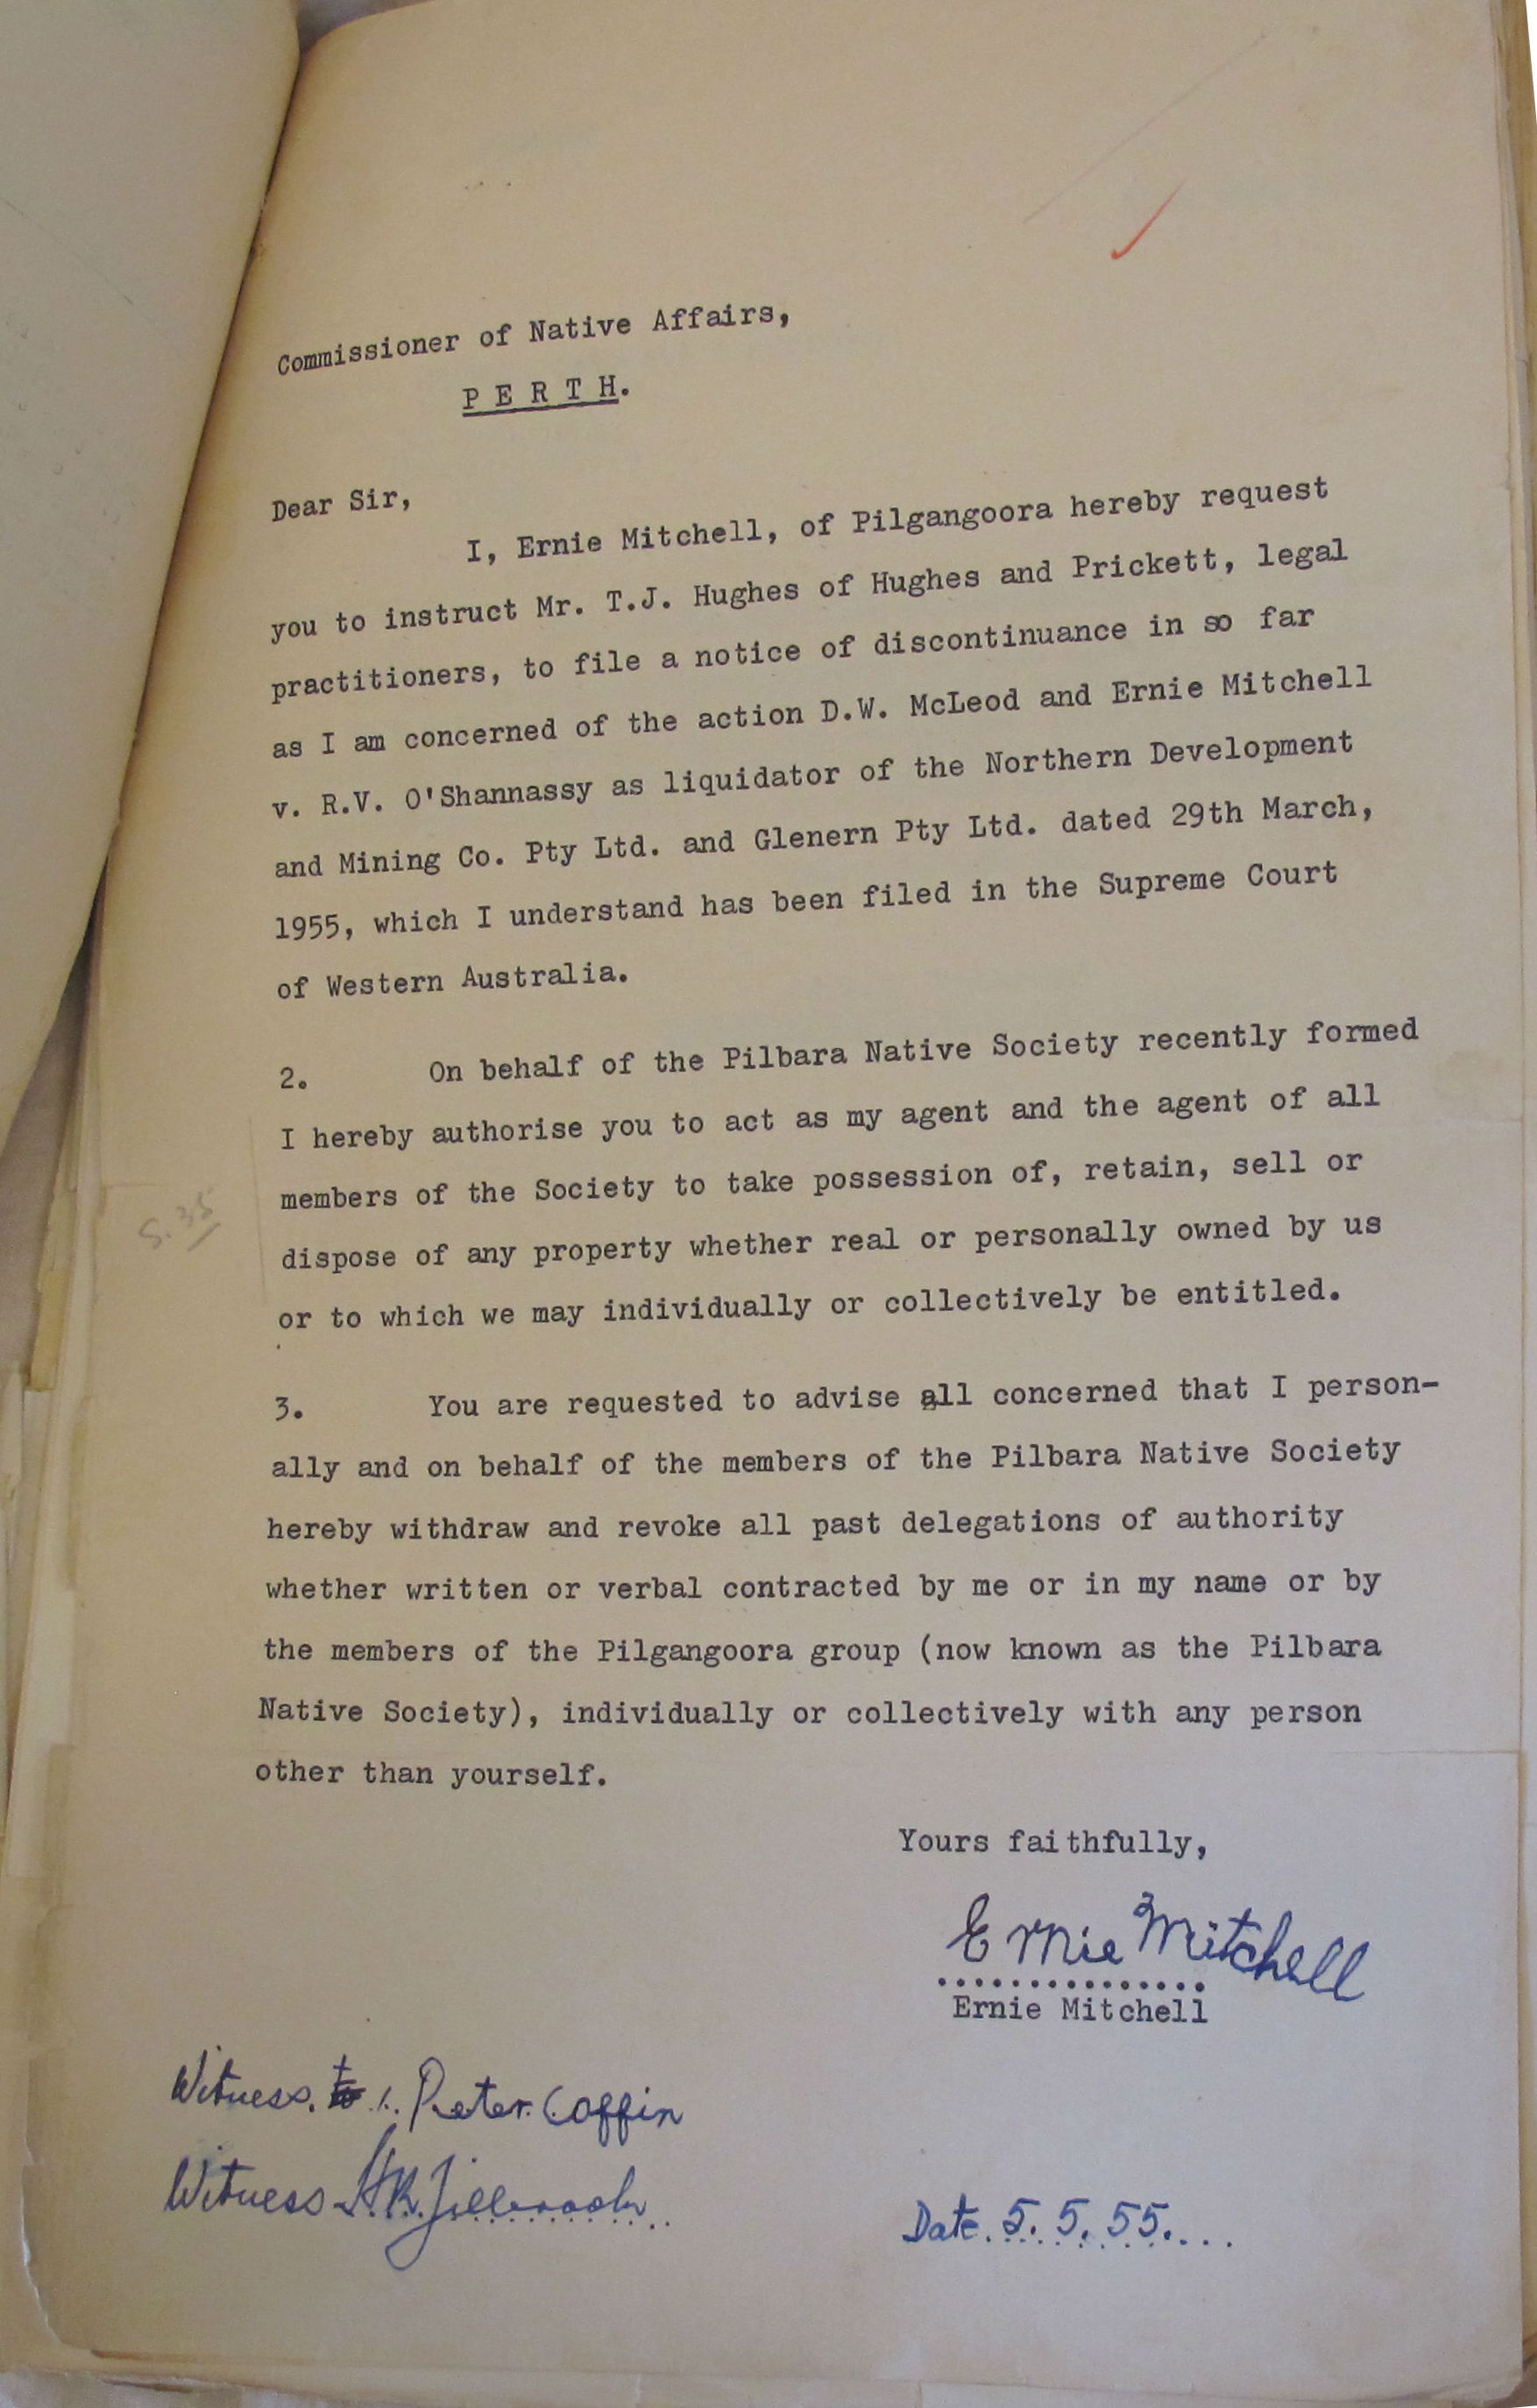 Mitchell to Middleton, 5 May 1955